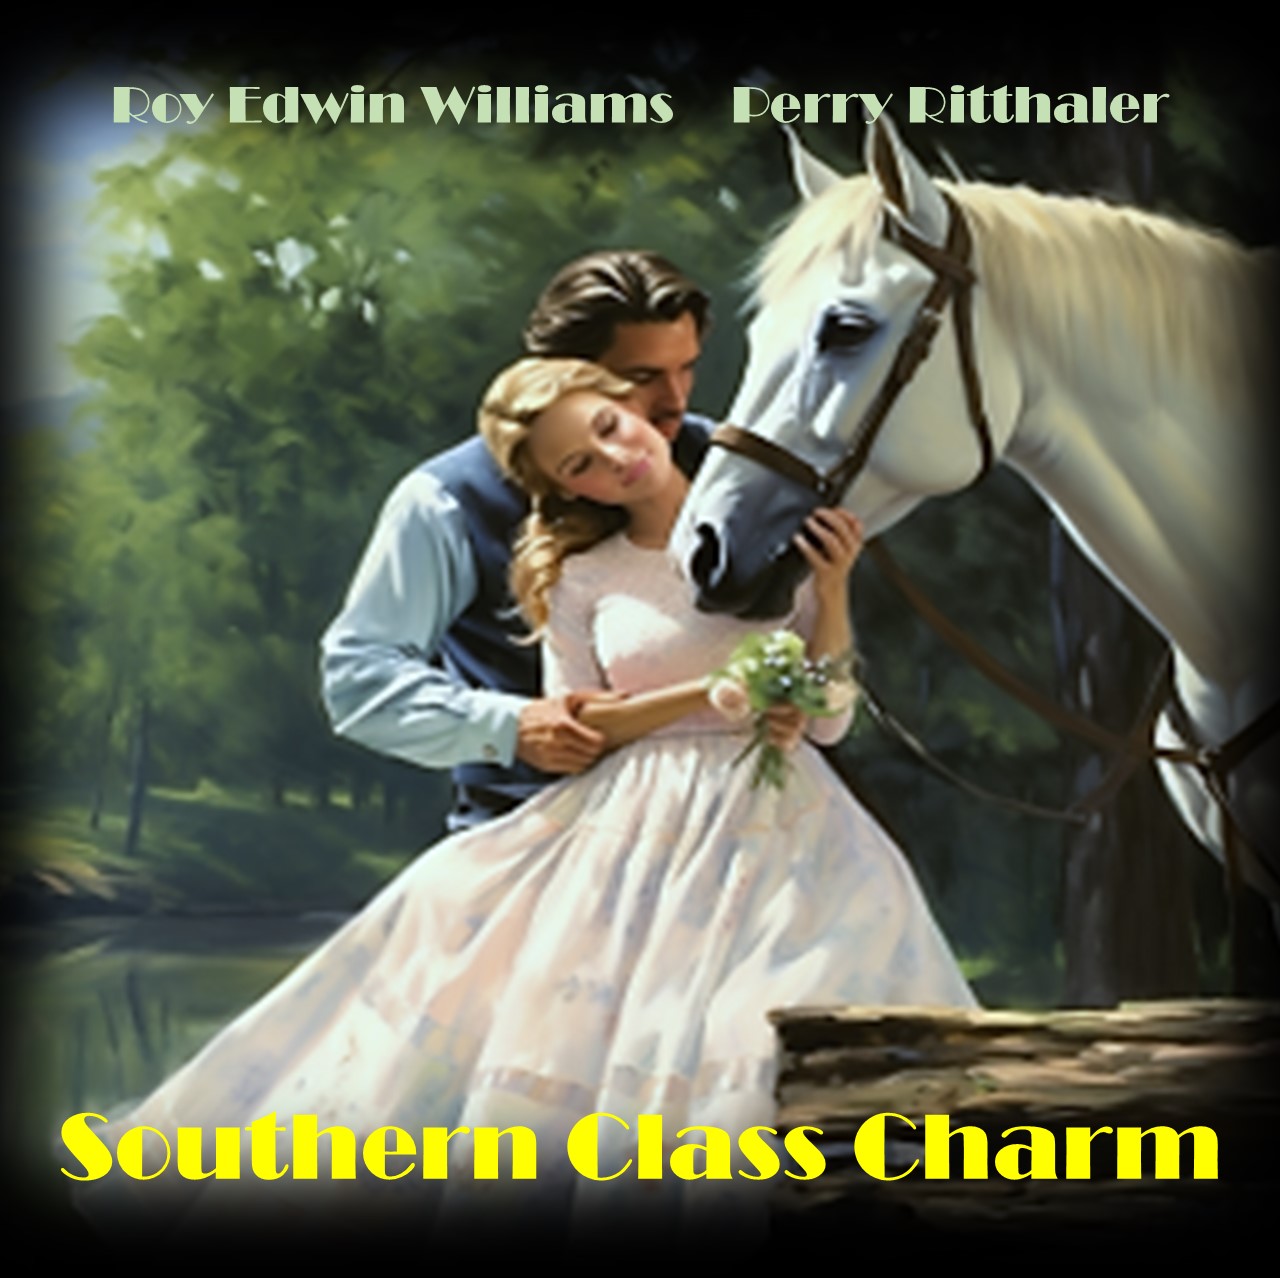 Southern Charm & Class